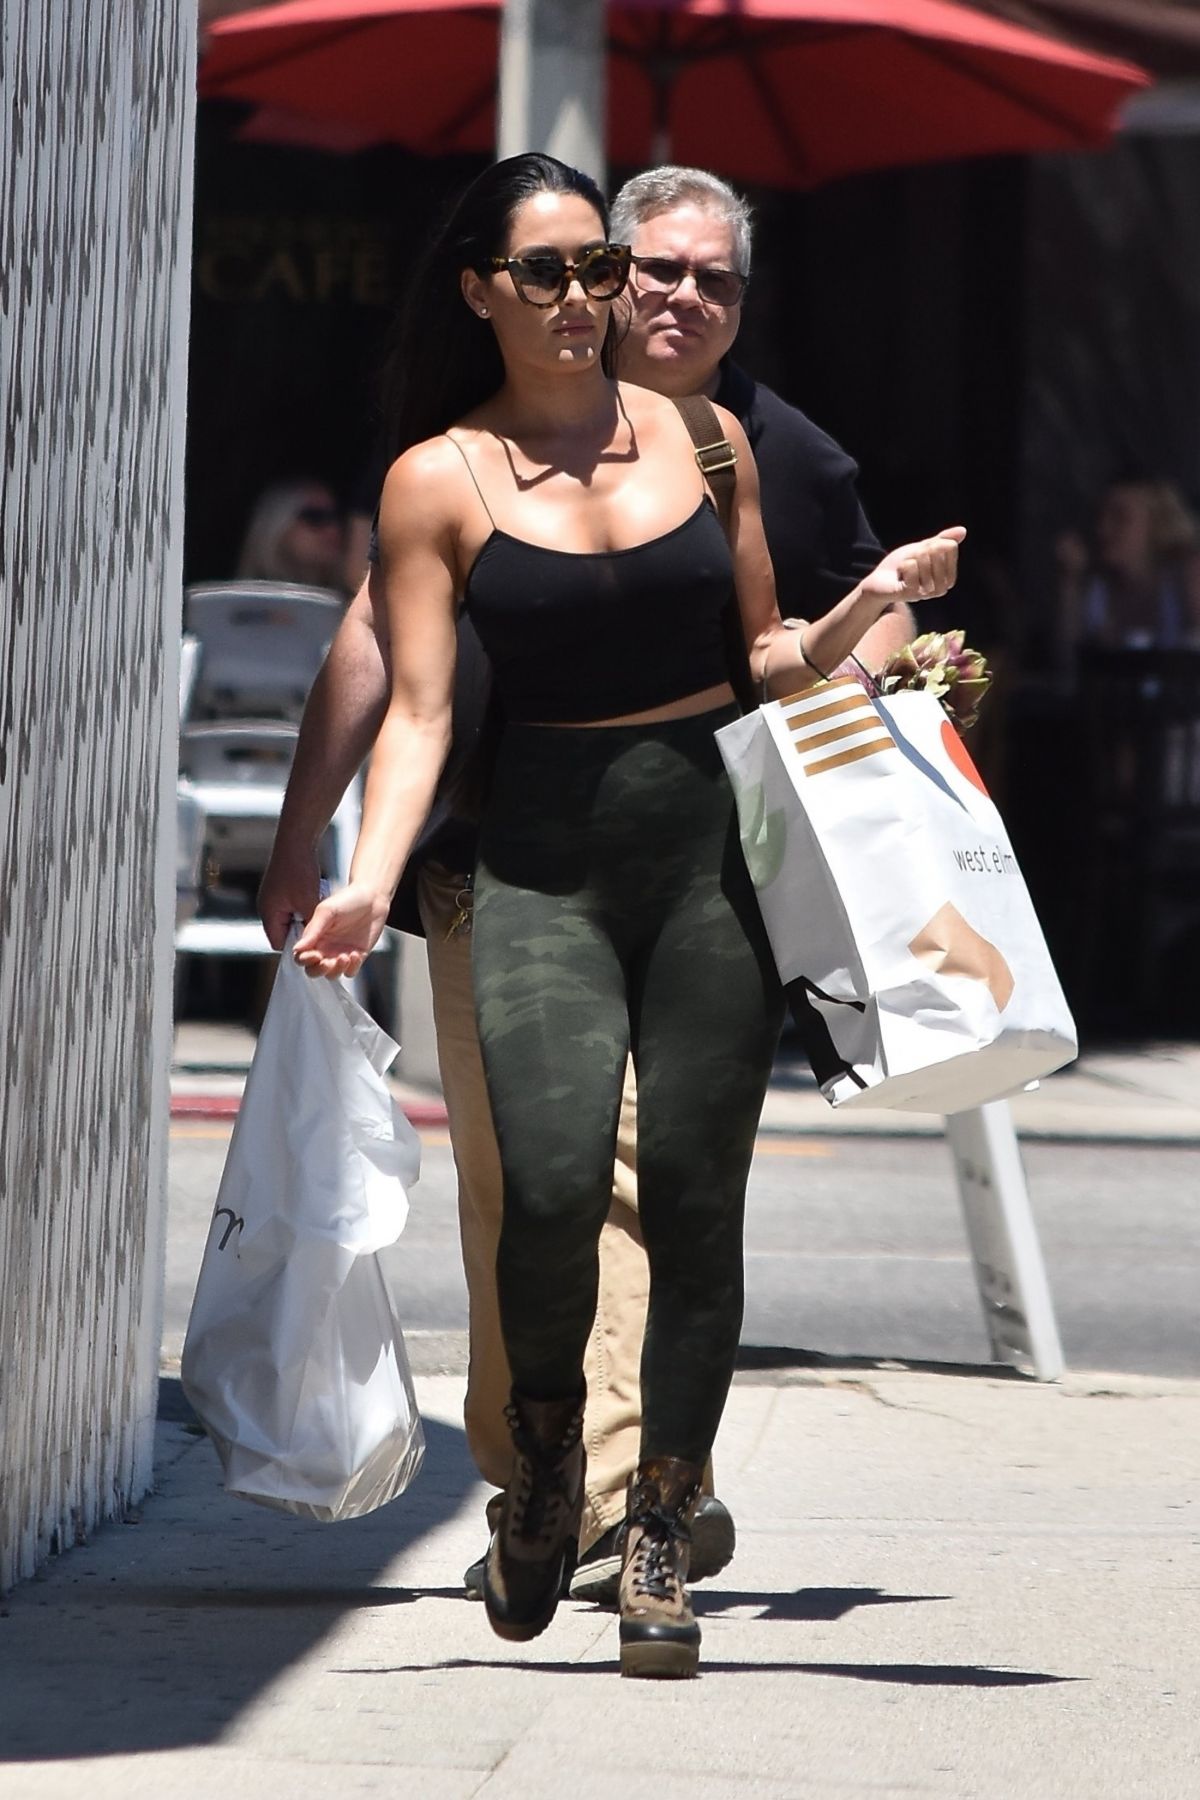 Nikki Bella Shopping at West Elm July 27, 2019 – Star Style